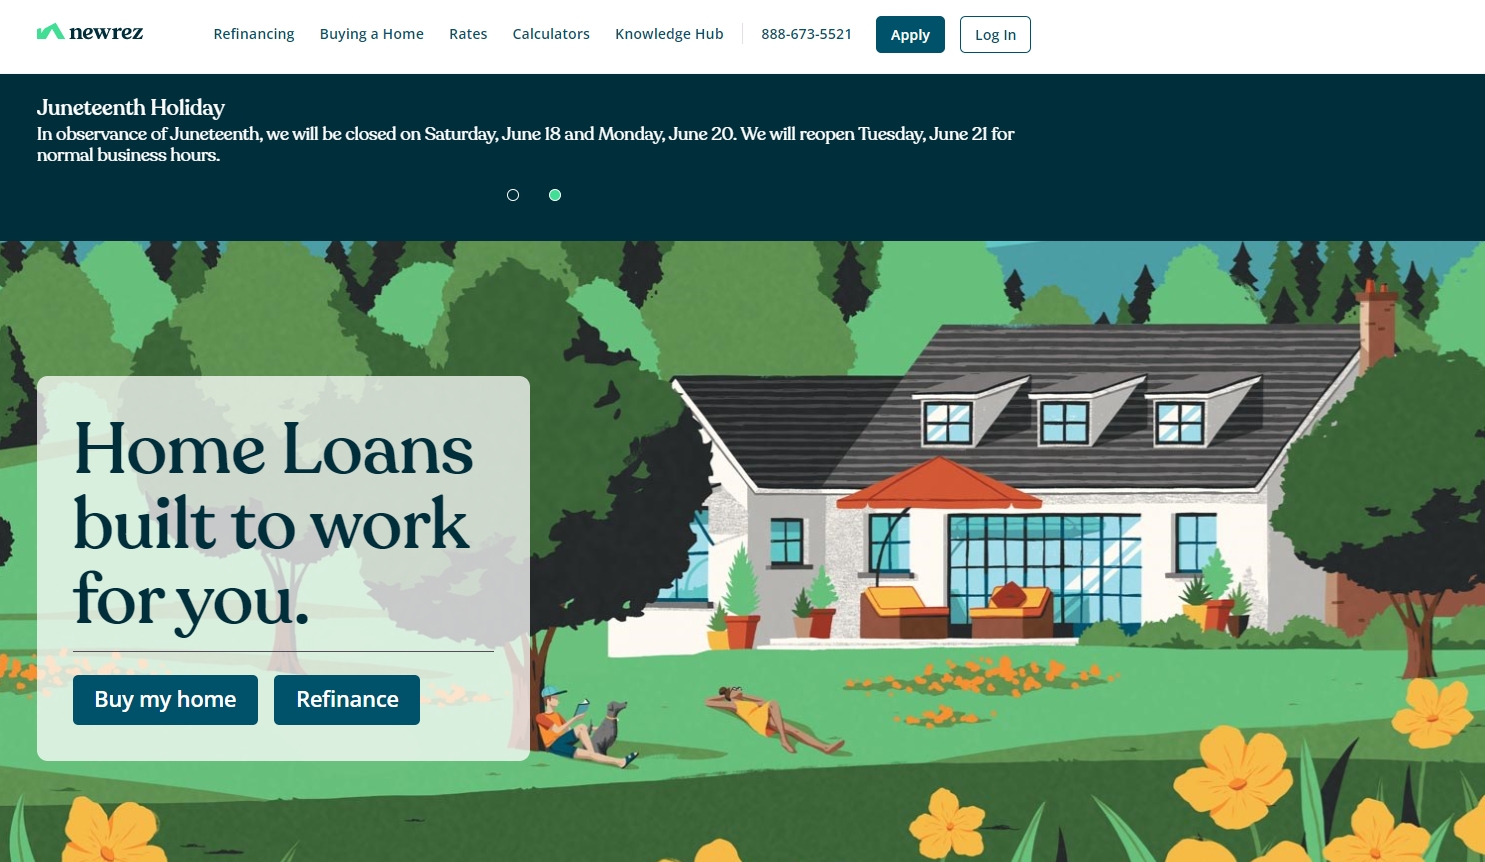 Newrez — How to Apply for an Mortgage Loan, Today Newrez Overview